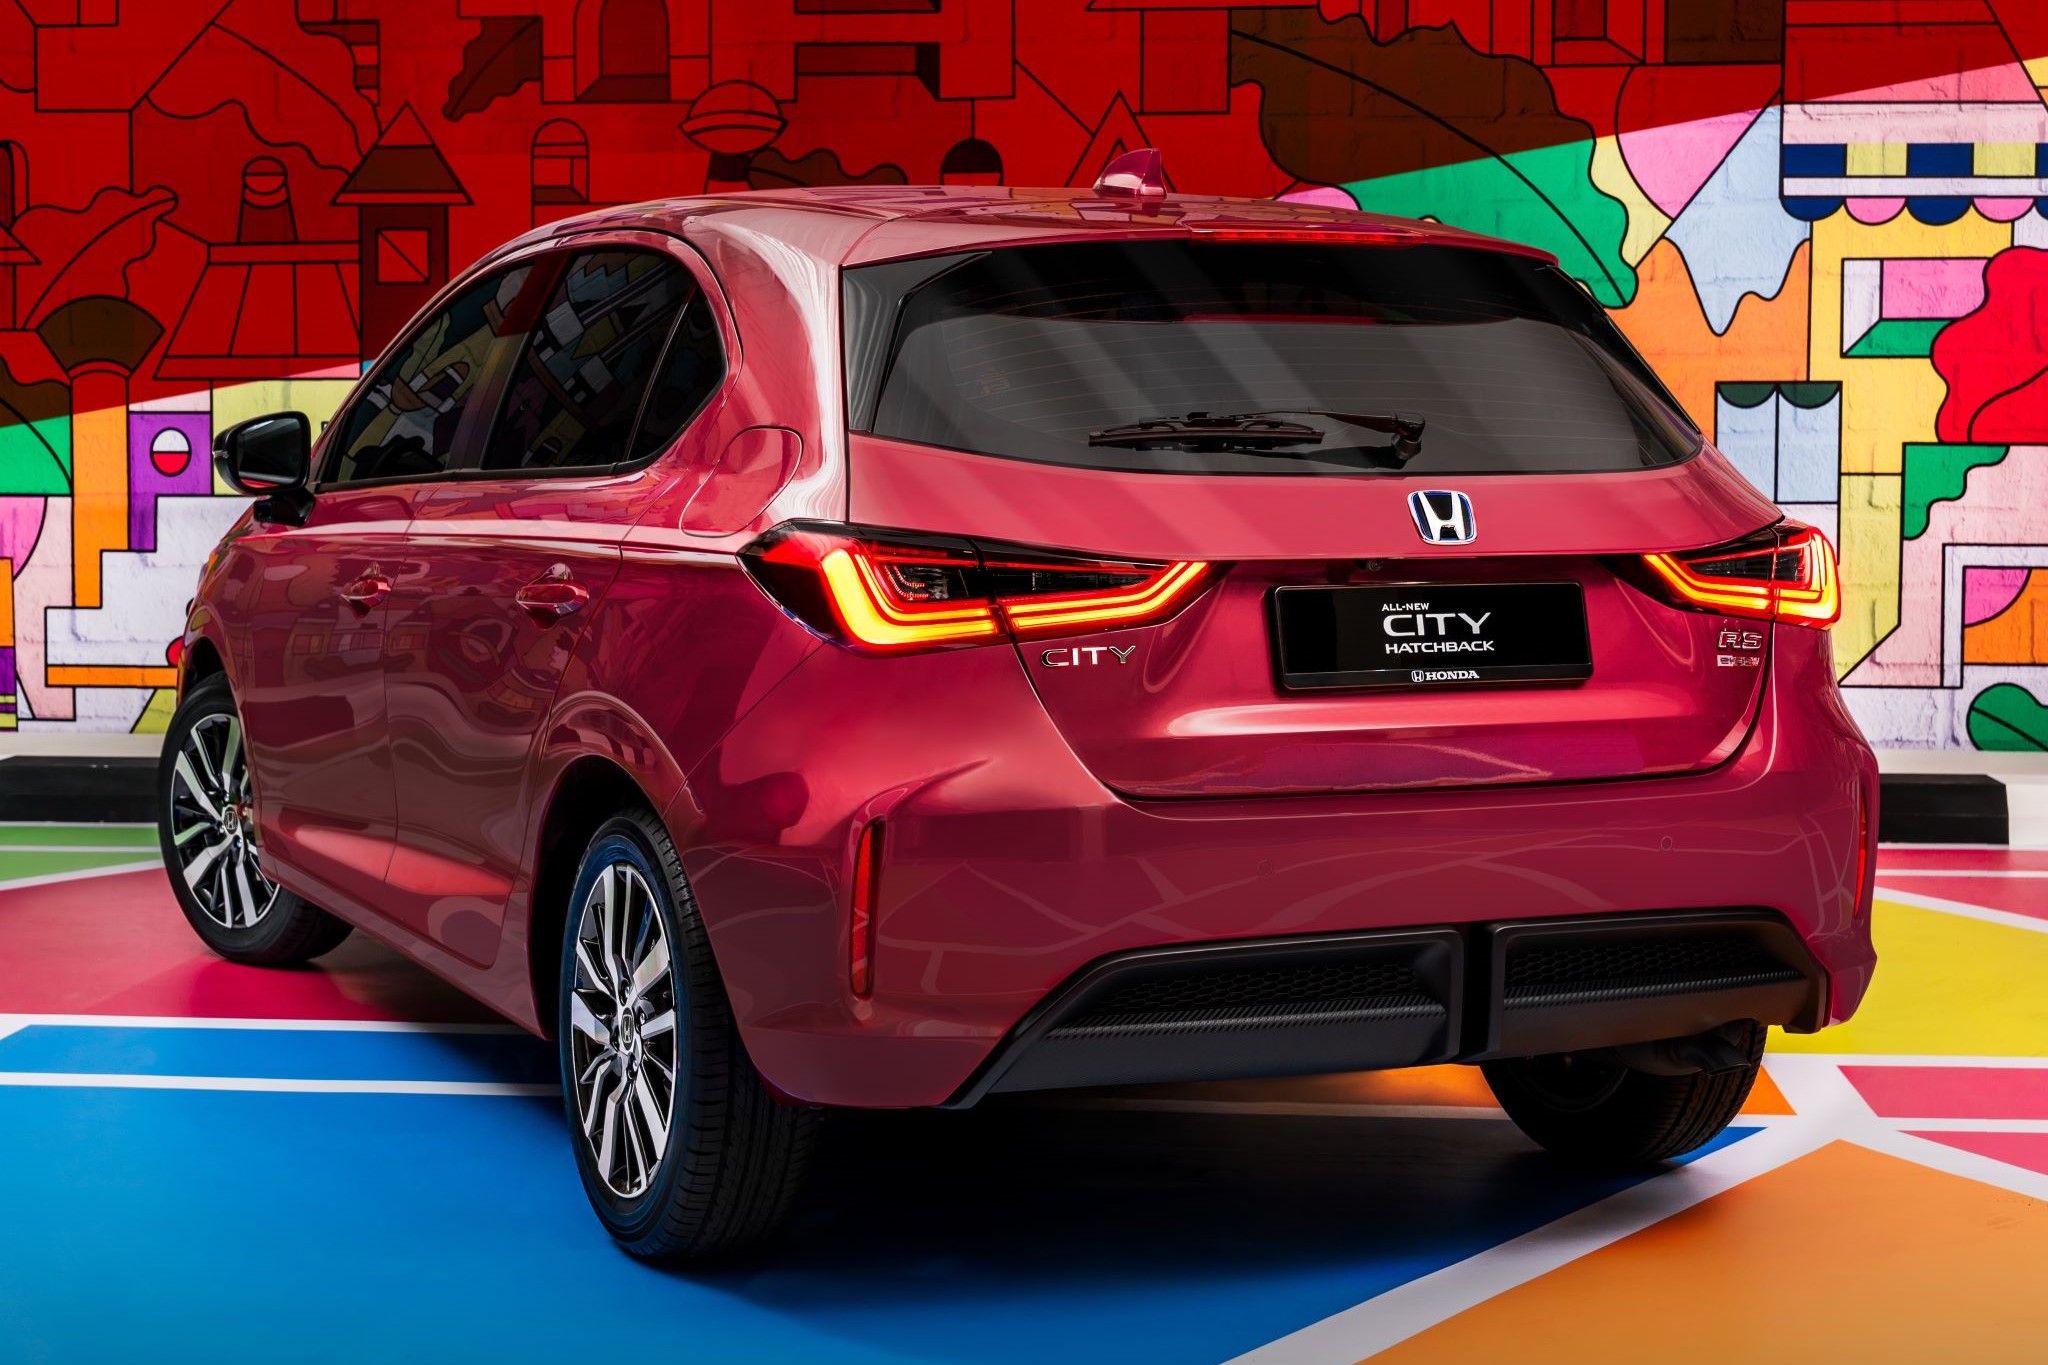 Confirmed: the Honda City Hatchback is coming to Malaysia